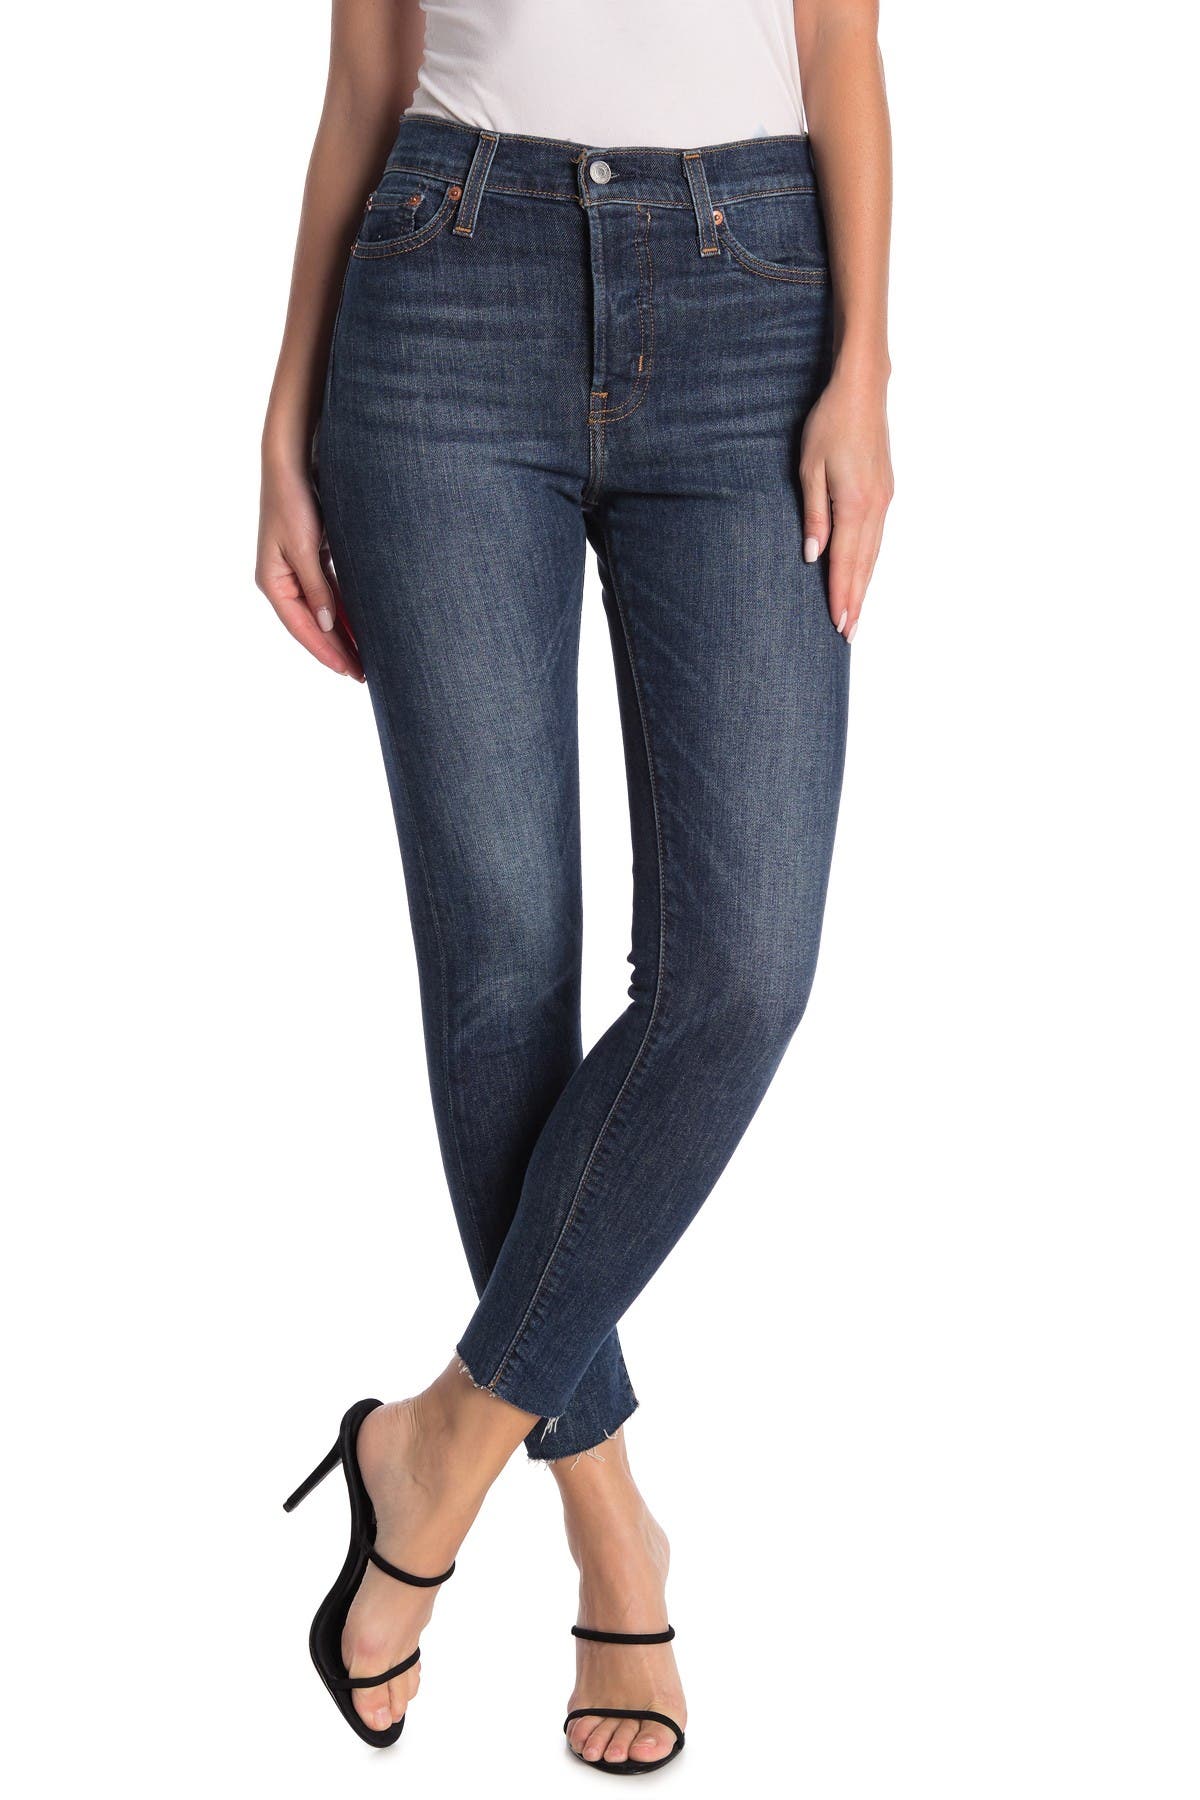 levi's wedgie skinny high rise